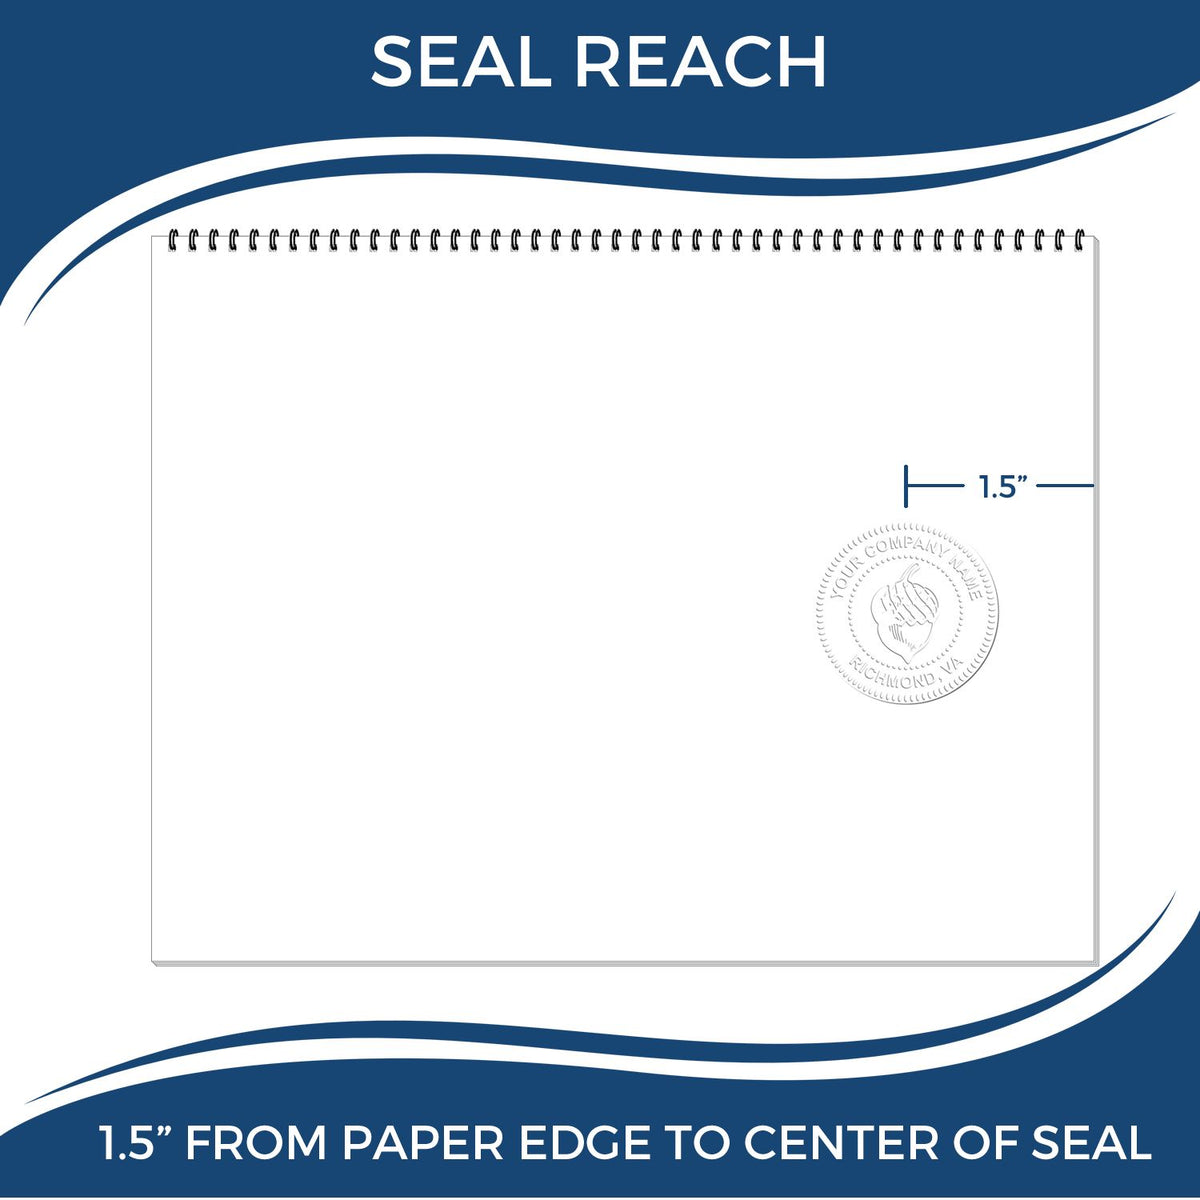 An infographic showing the seal reach which is represented by a ruler and a miniature seal image of the State of Nevada Soft Land Surveyor Embossing Seal